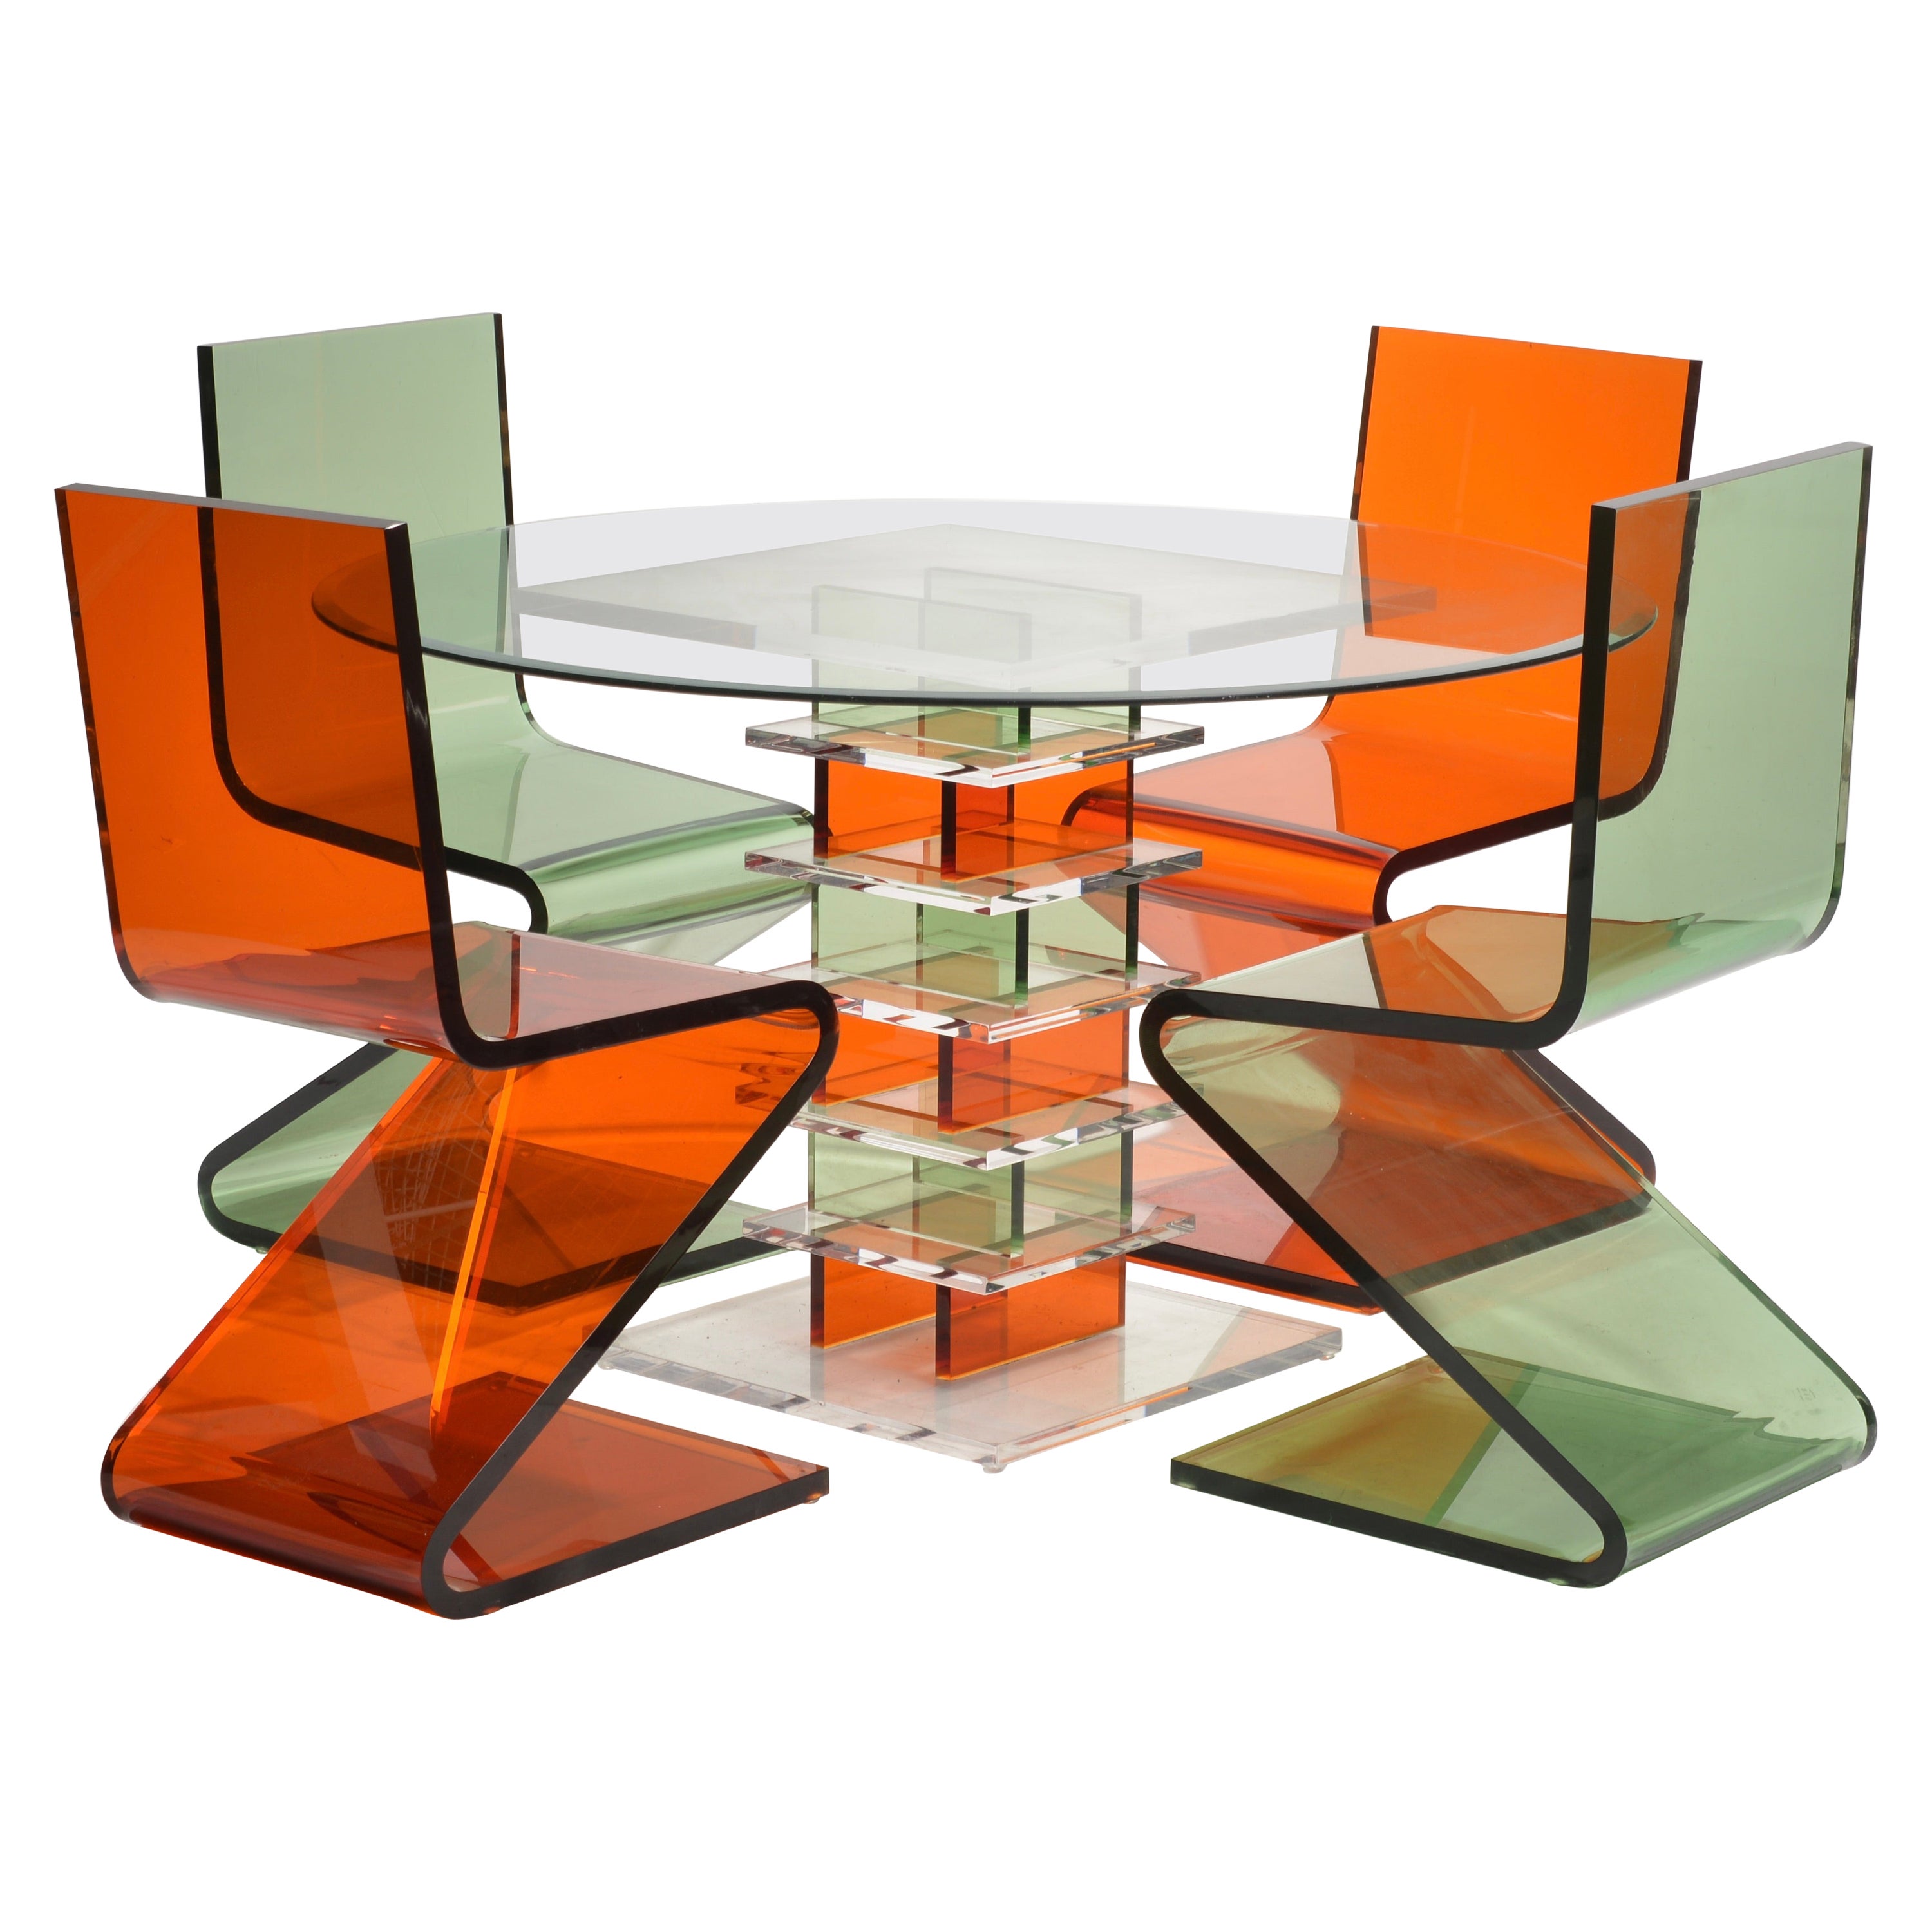 Vintage Lucite Z Table and Z Chairs by Shlomi Haziza for H Studio For Sale